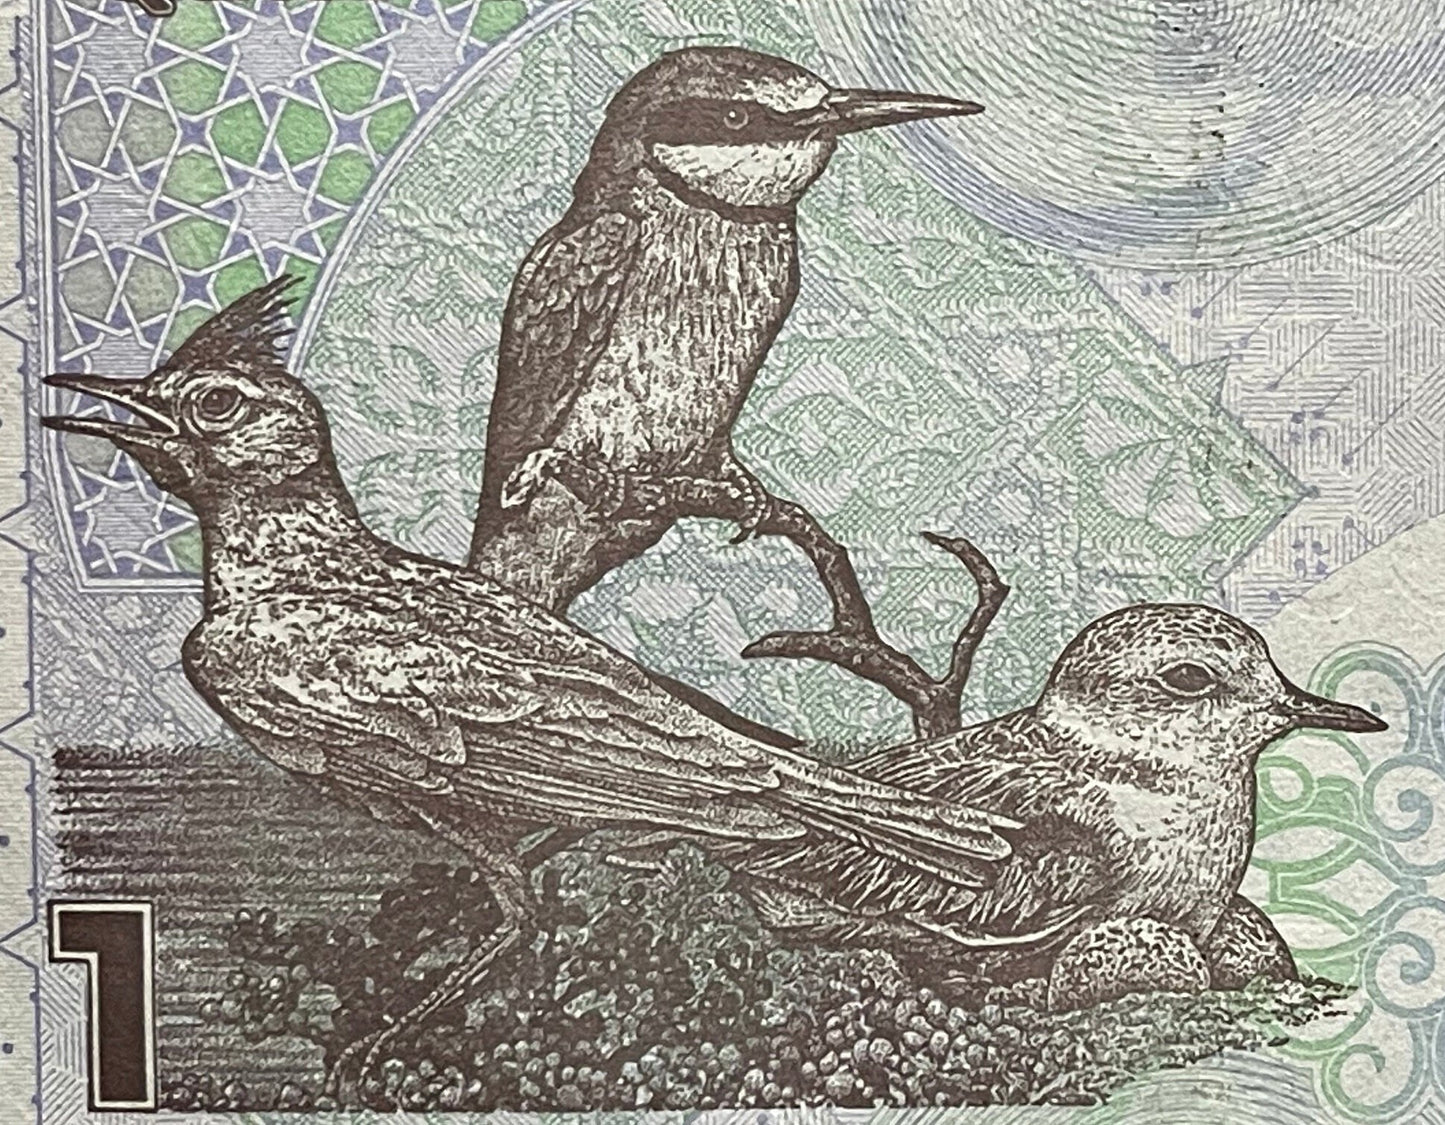 Lark, Bee-Eater, Plover & Sailing Dhow 1 Riyal Qatar Authentic Banknote Money for Jewelry and Collage (Al Jazeera) (Native Birds)